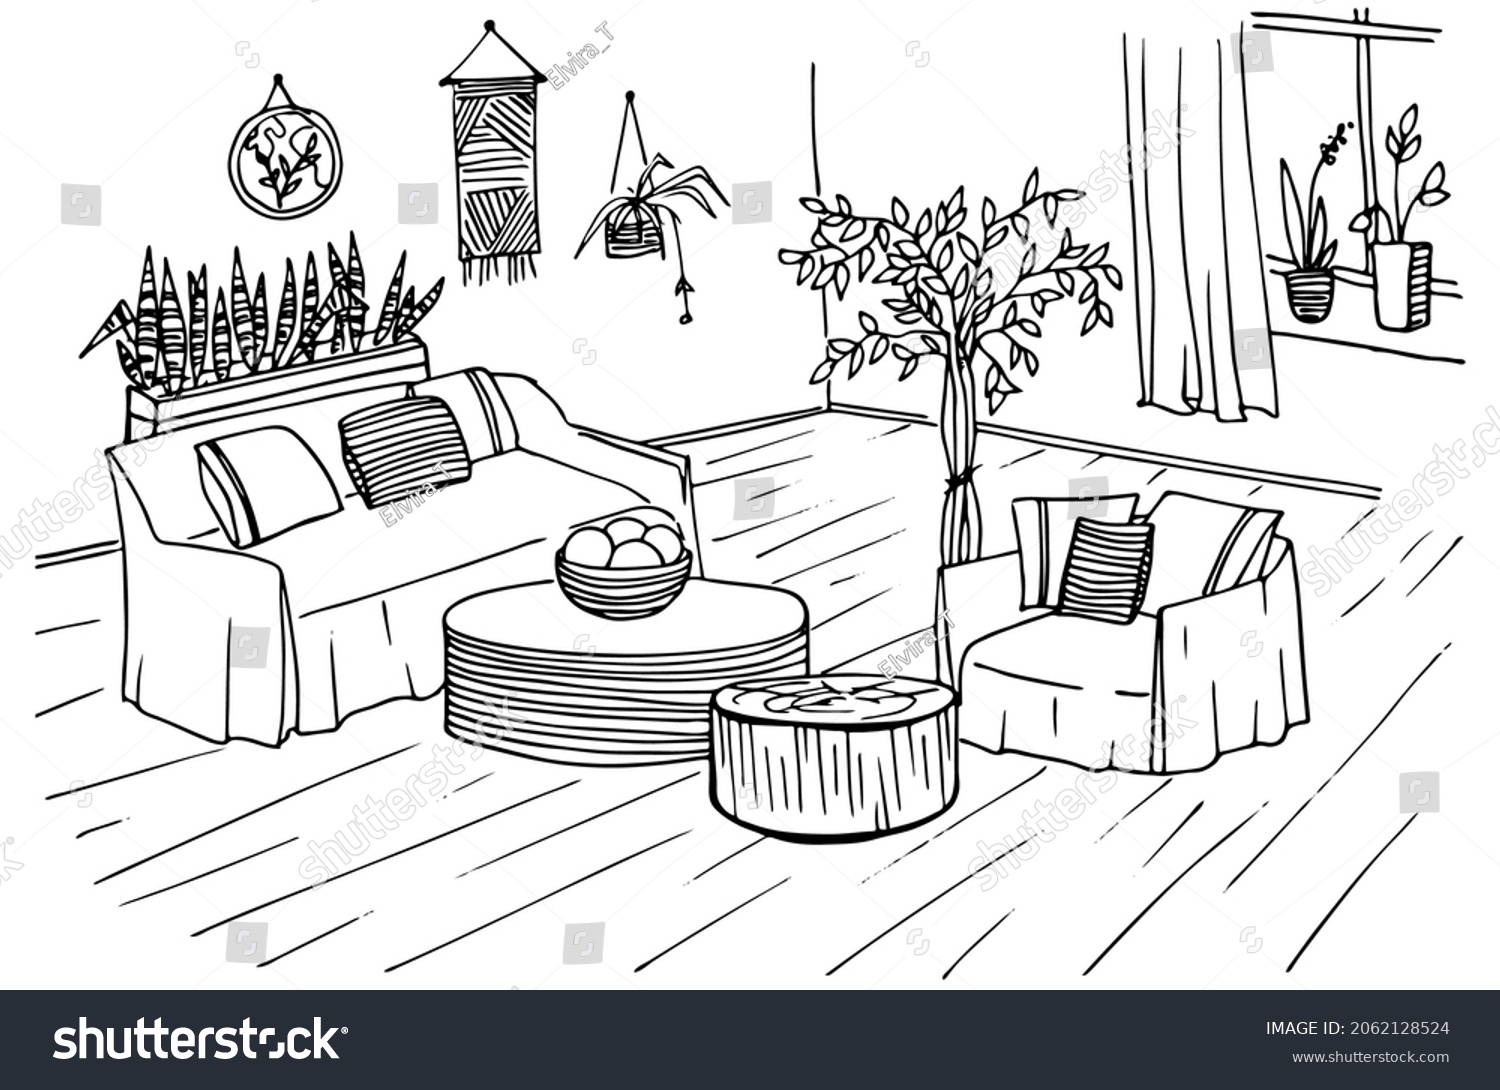 Living Room Interior Coloring Book Coloring Stock Vector (Royalty Free ...